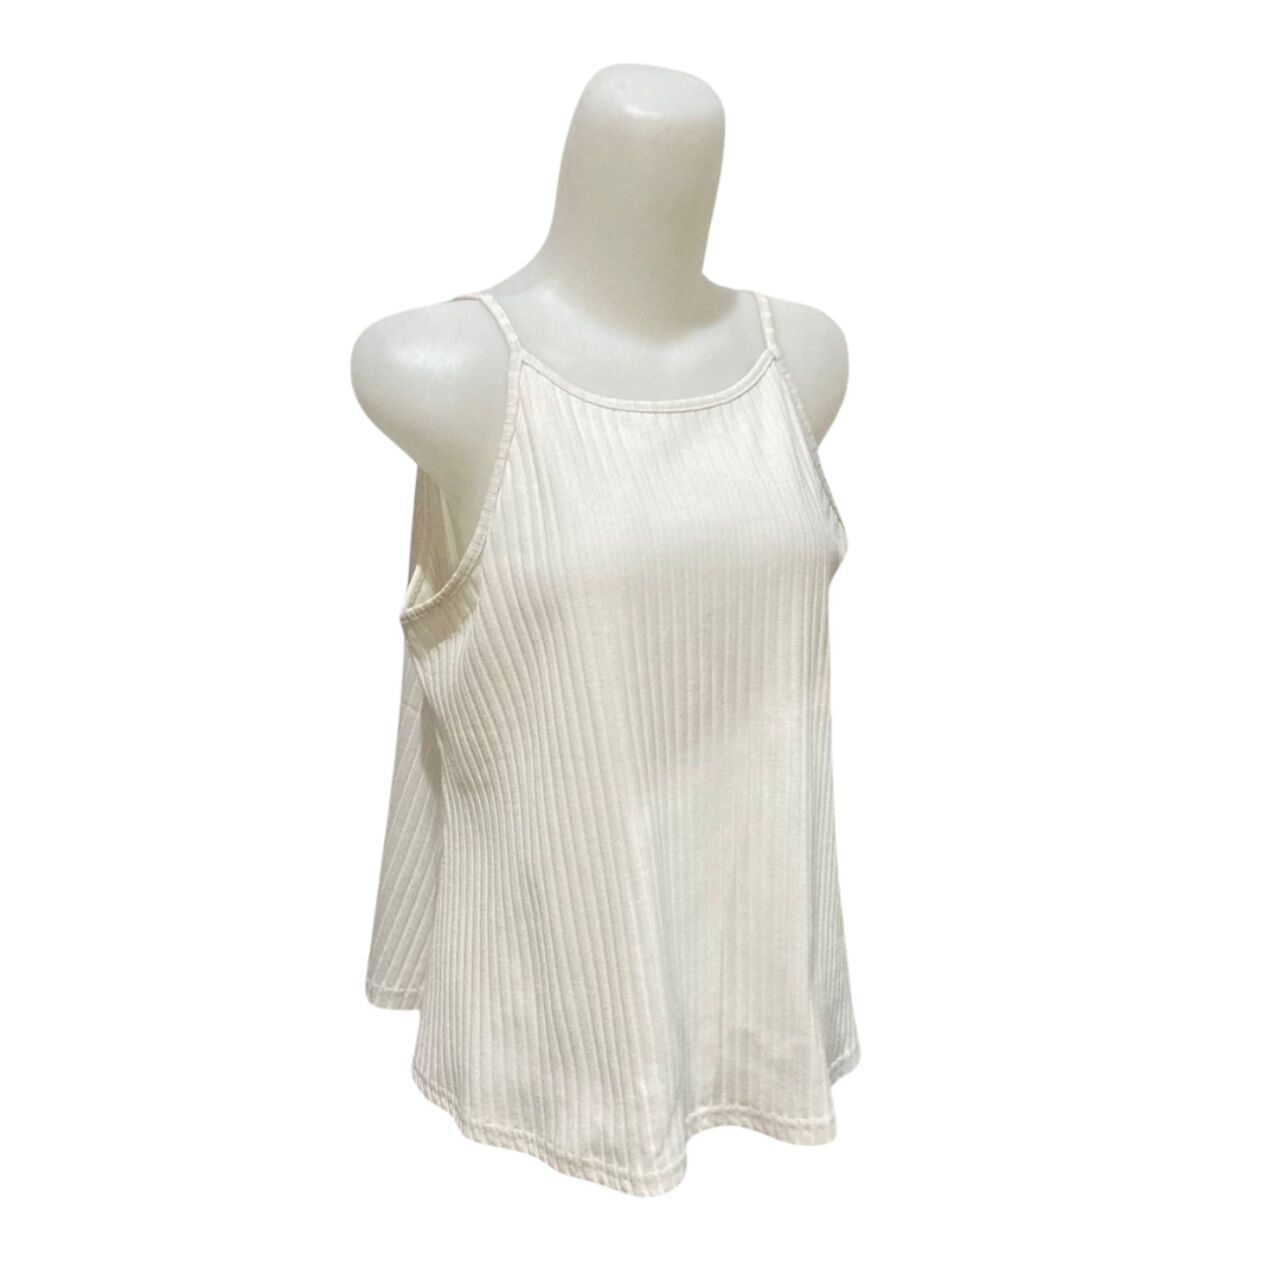 This Is April White Knit Top